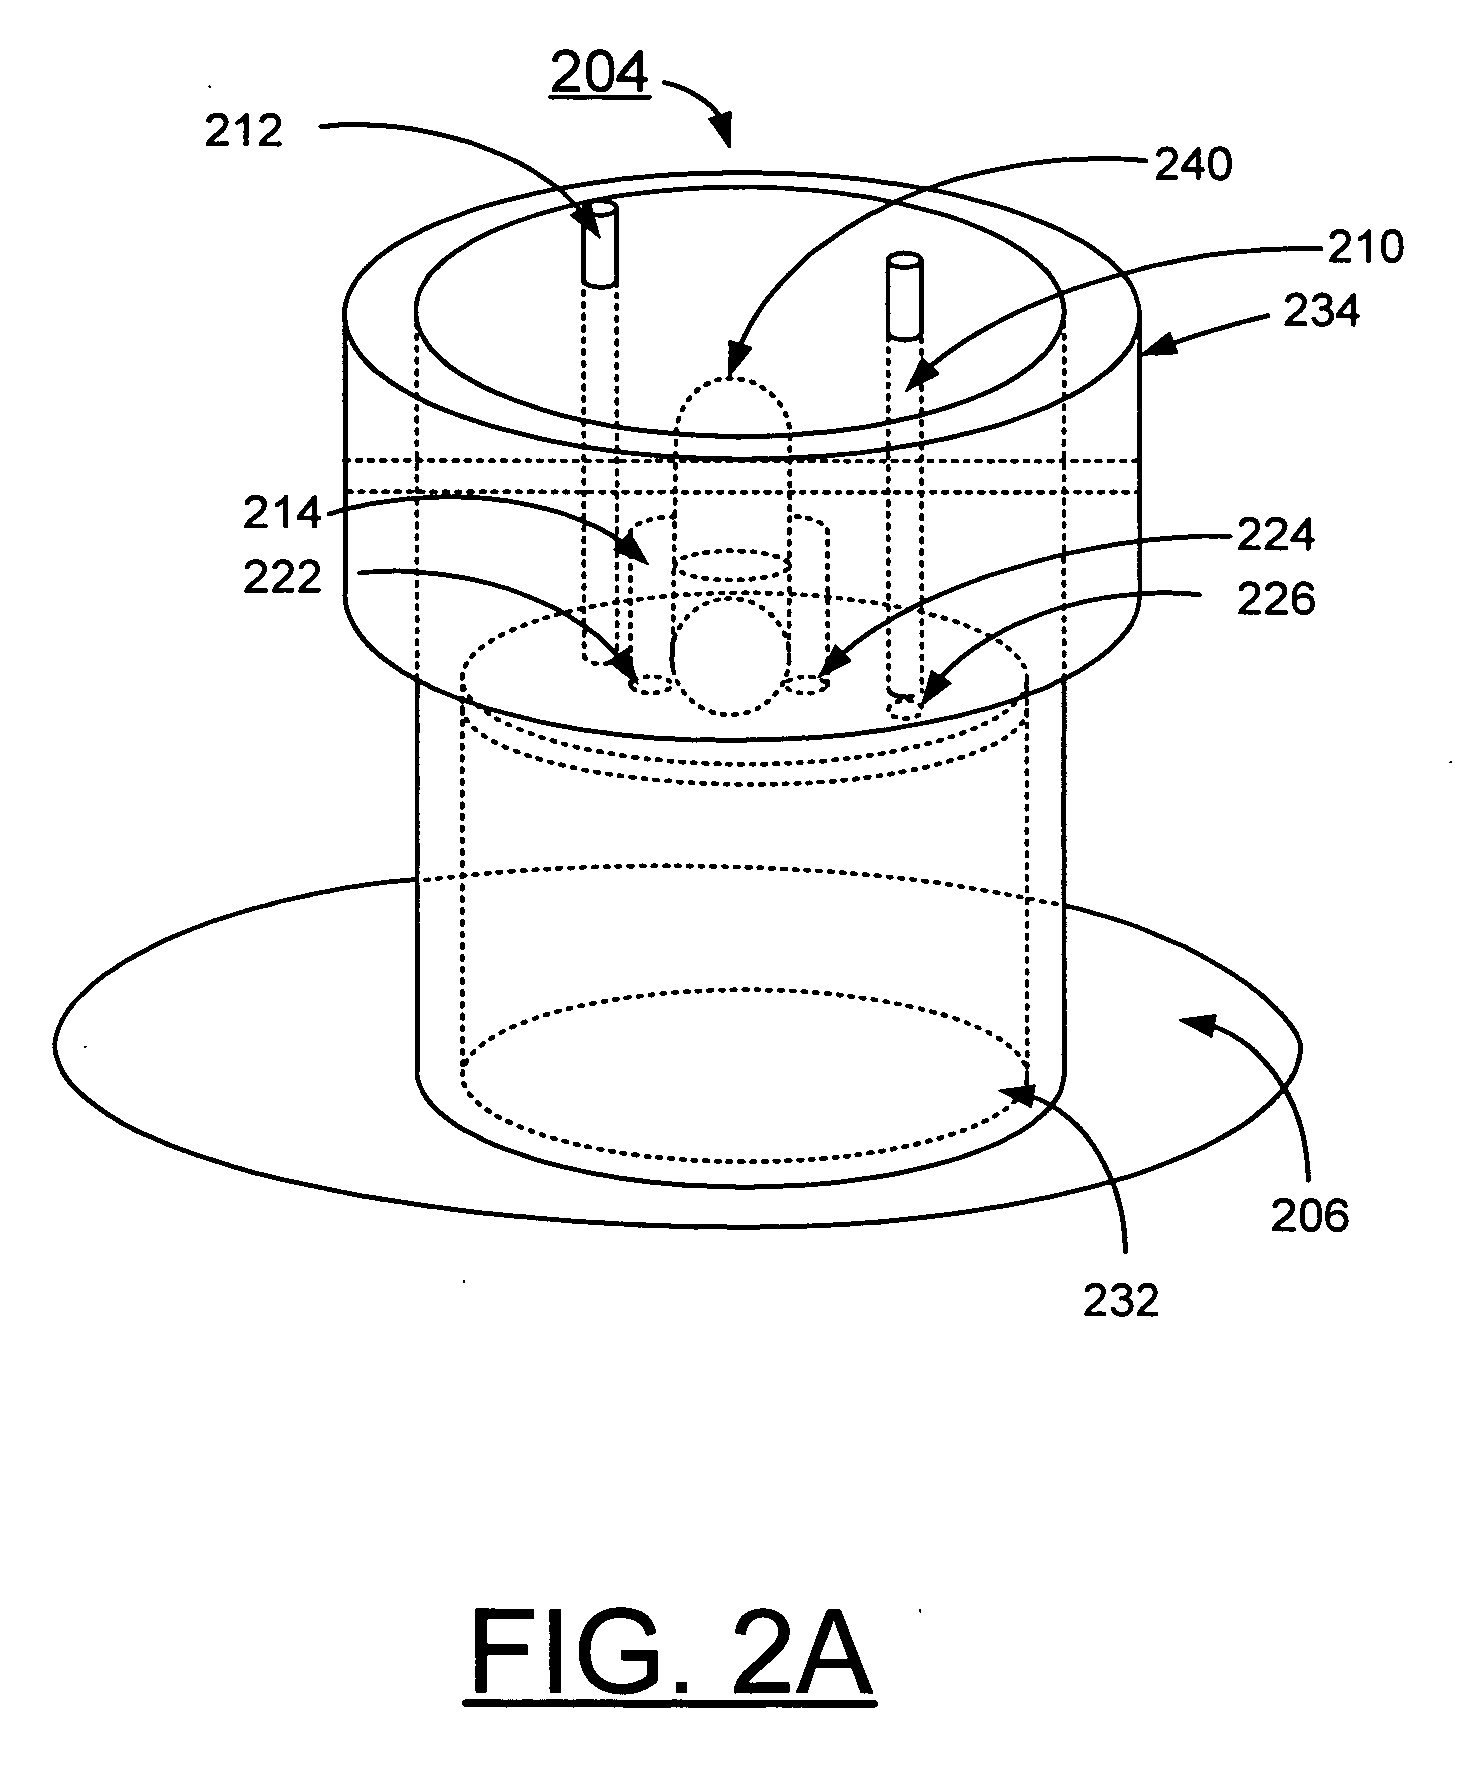 Combinatorial electrochemical deposition system